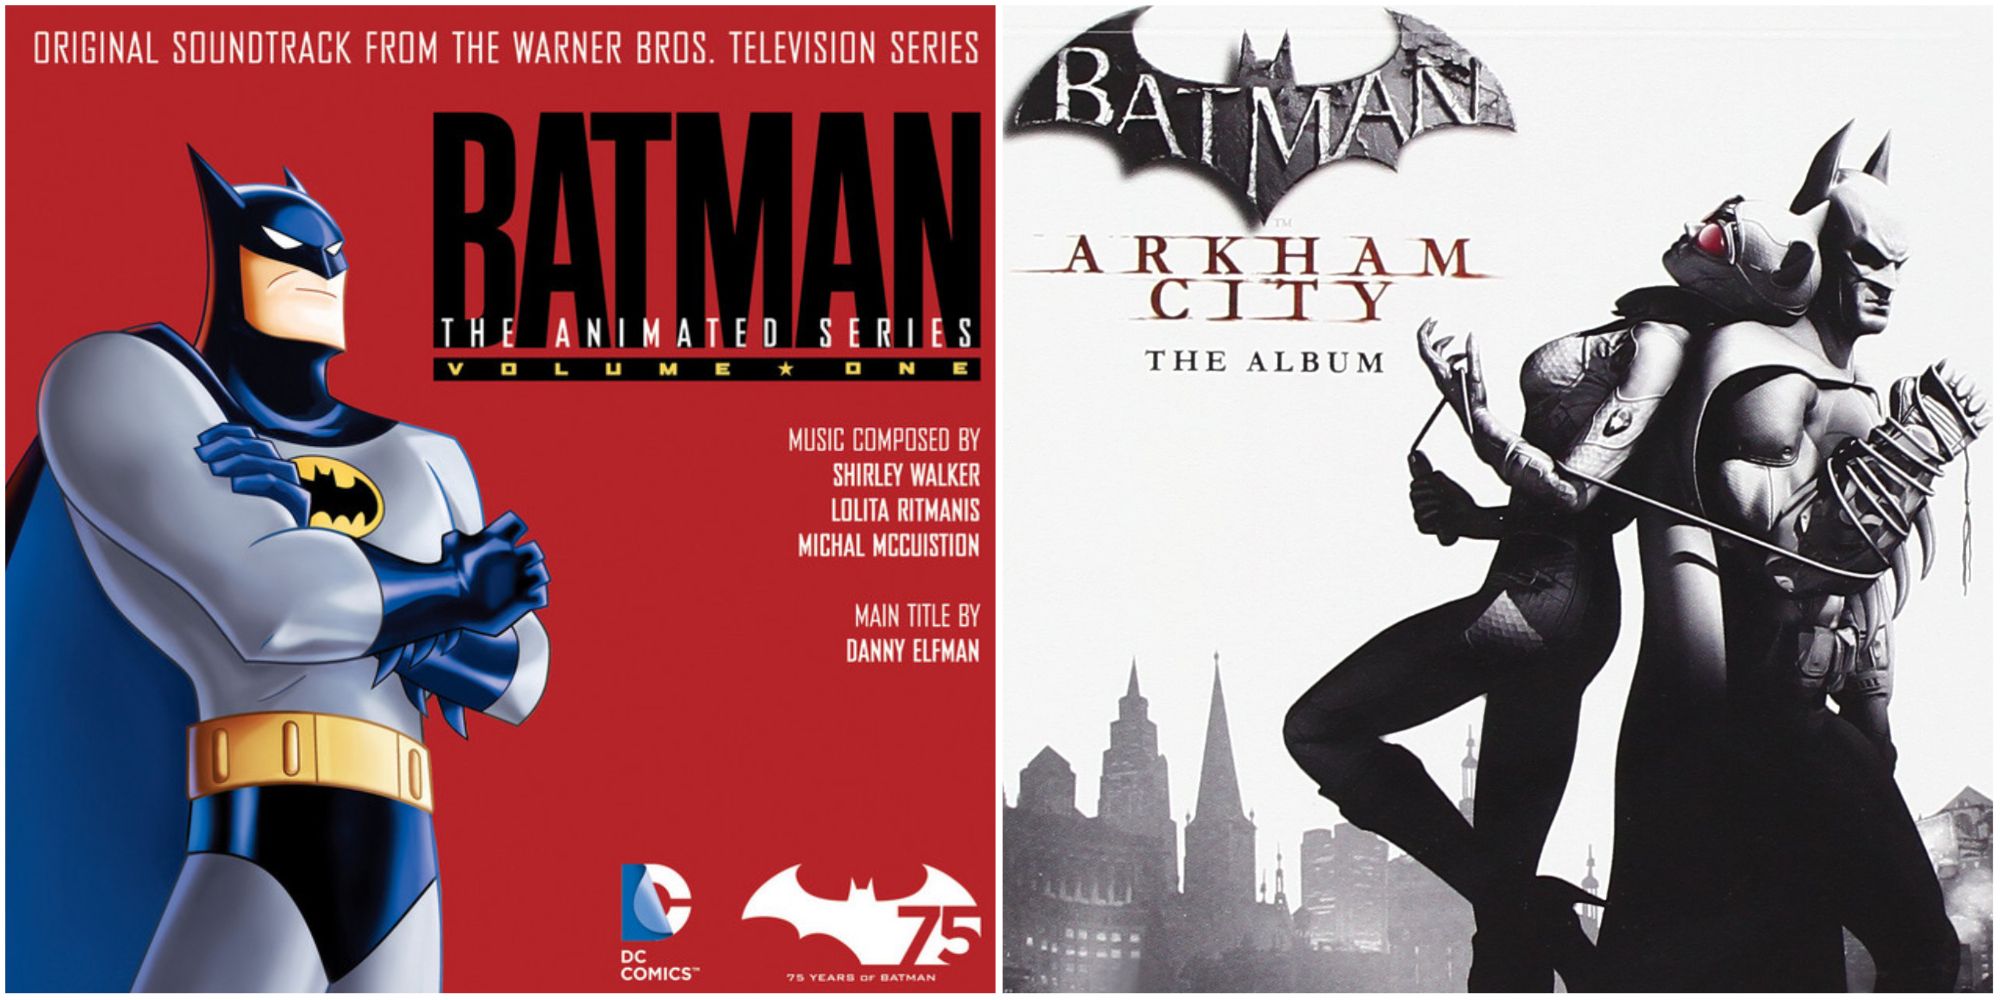 Music in Batman: The Animated Series and Arkham City